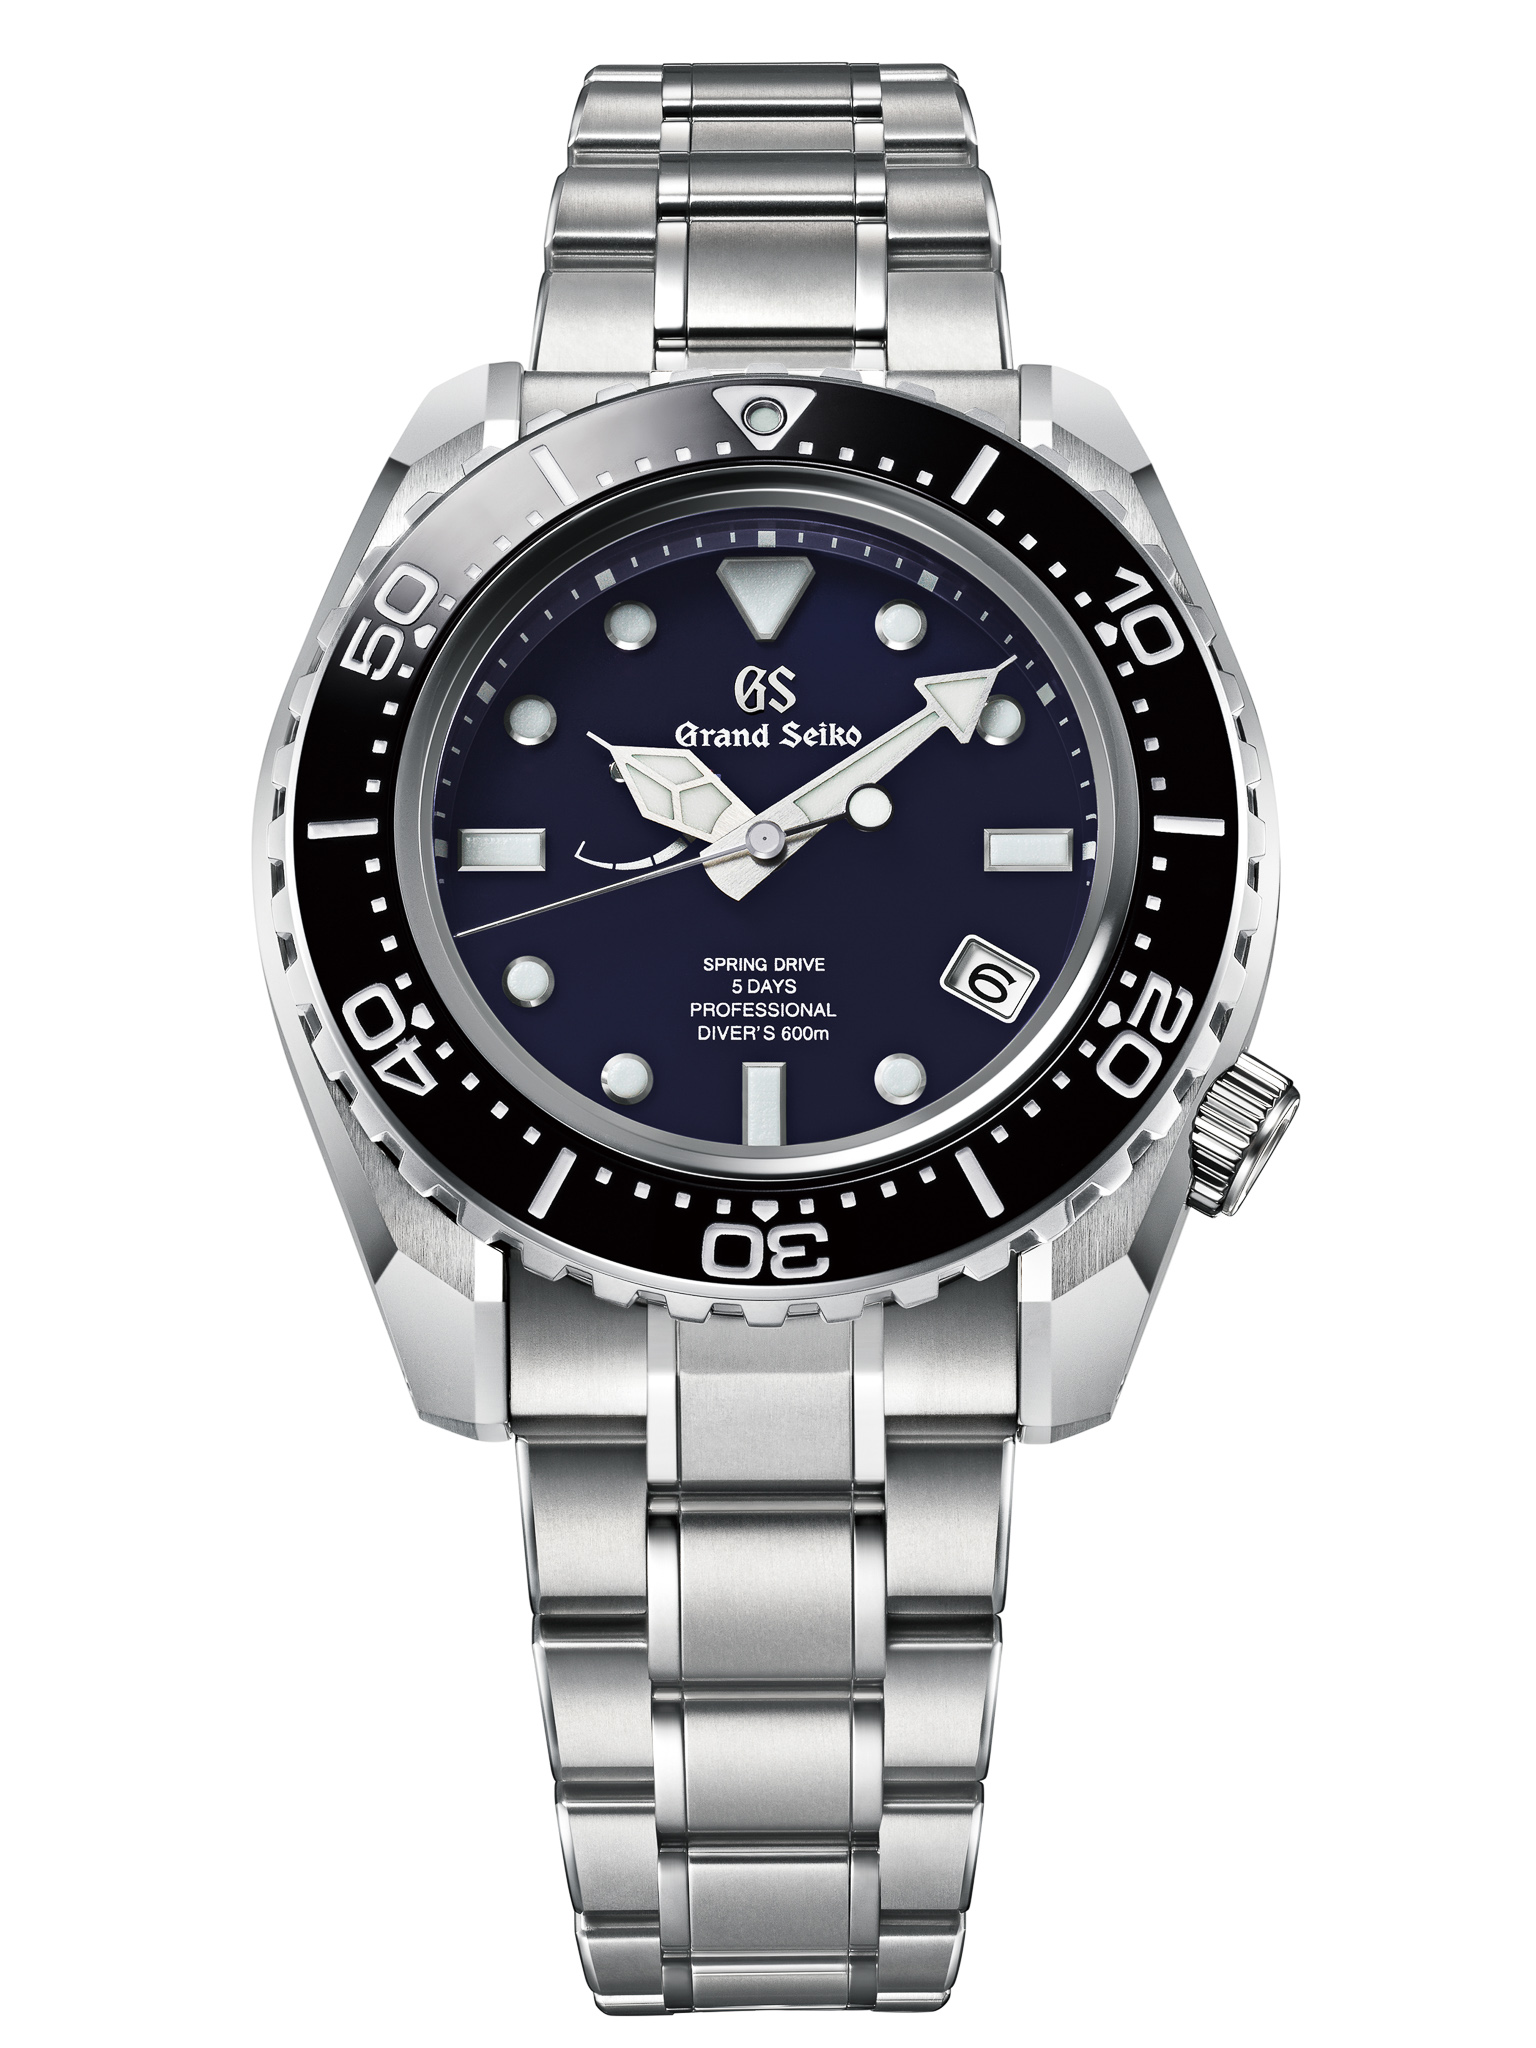 Grand Seiko Debuts New Spring Drive Movement In SLGA001 60th Anniversary Dive  Watch | aBlogtoWatch